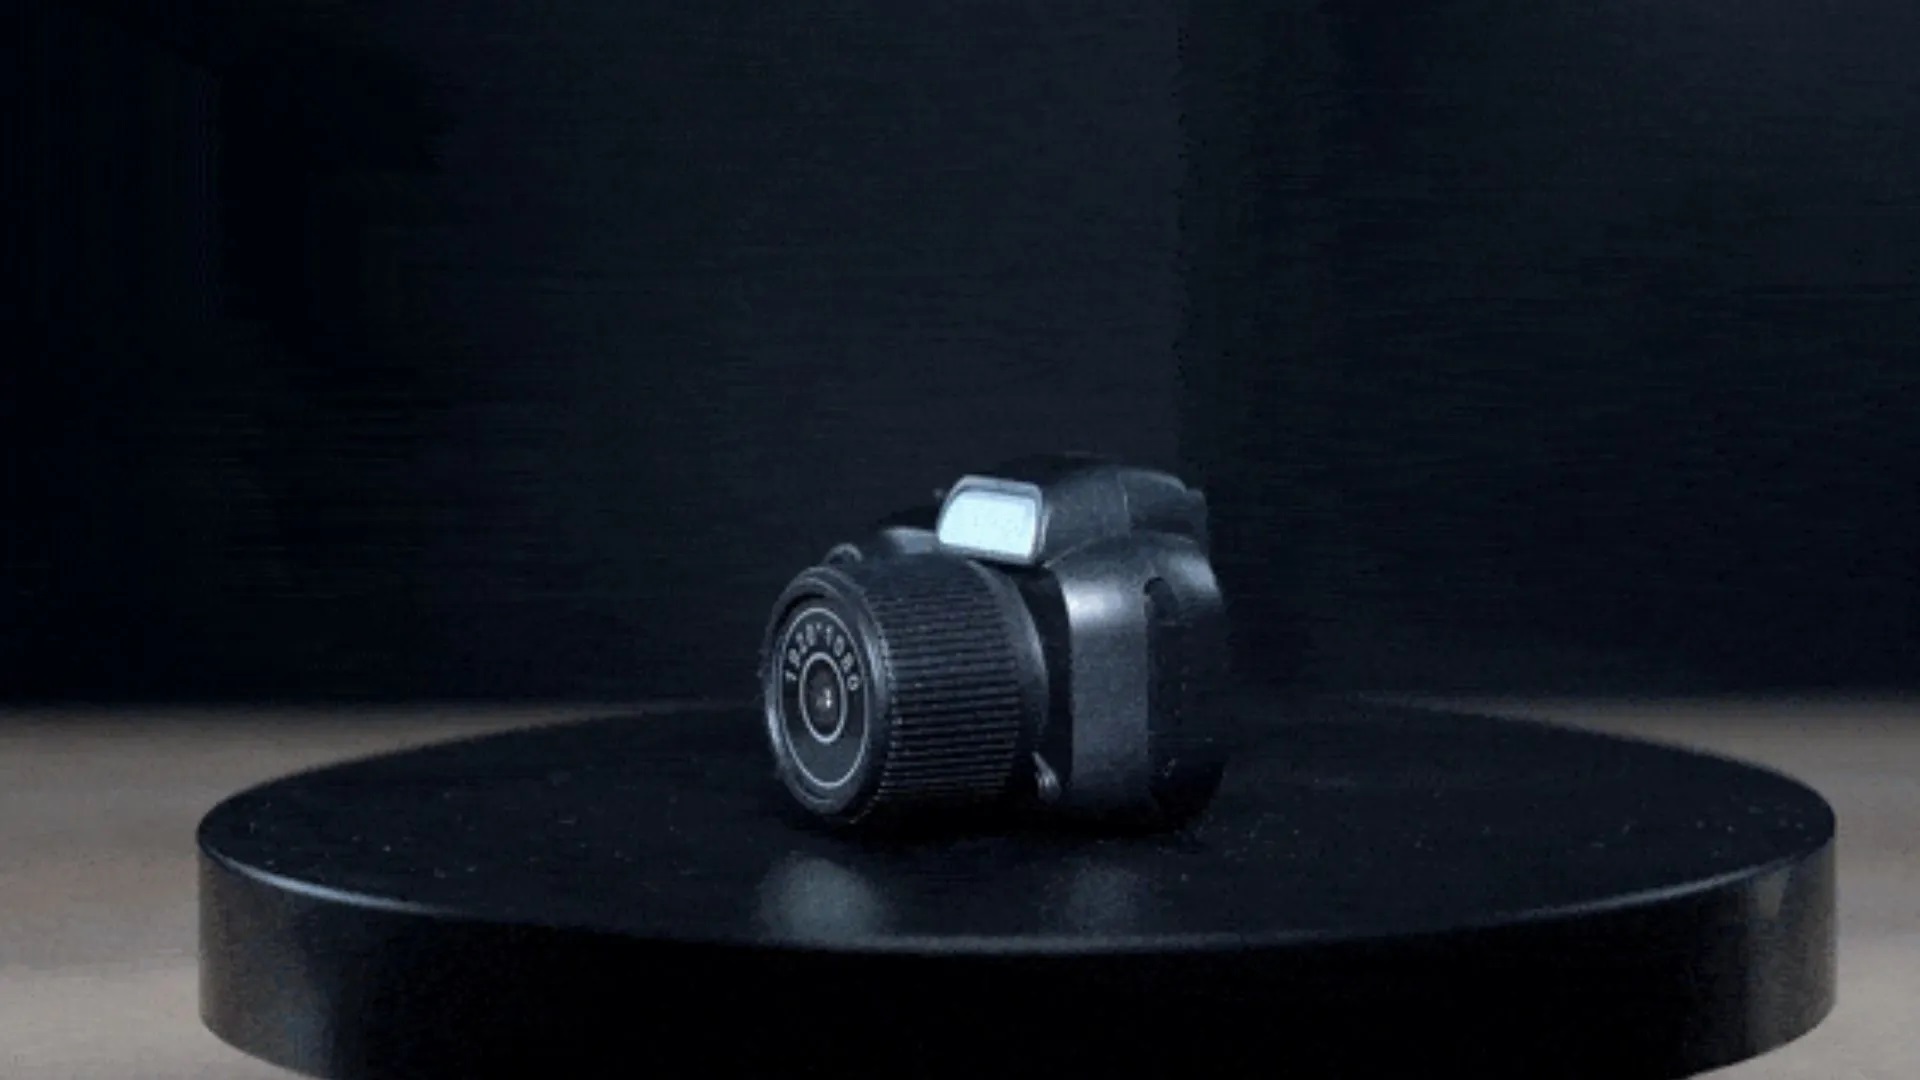 MiniCa: the world's smallest camera weighing just 17g